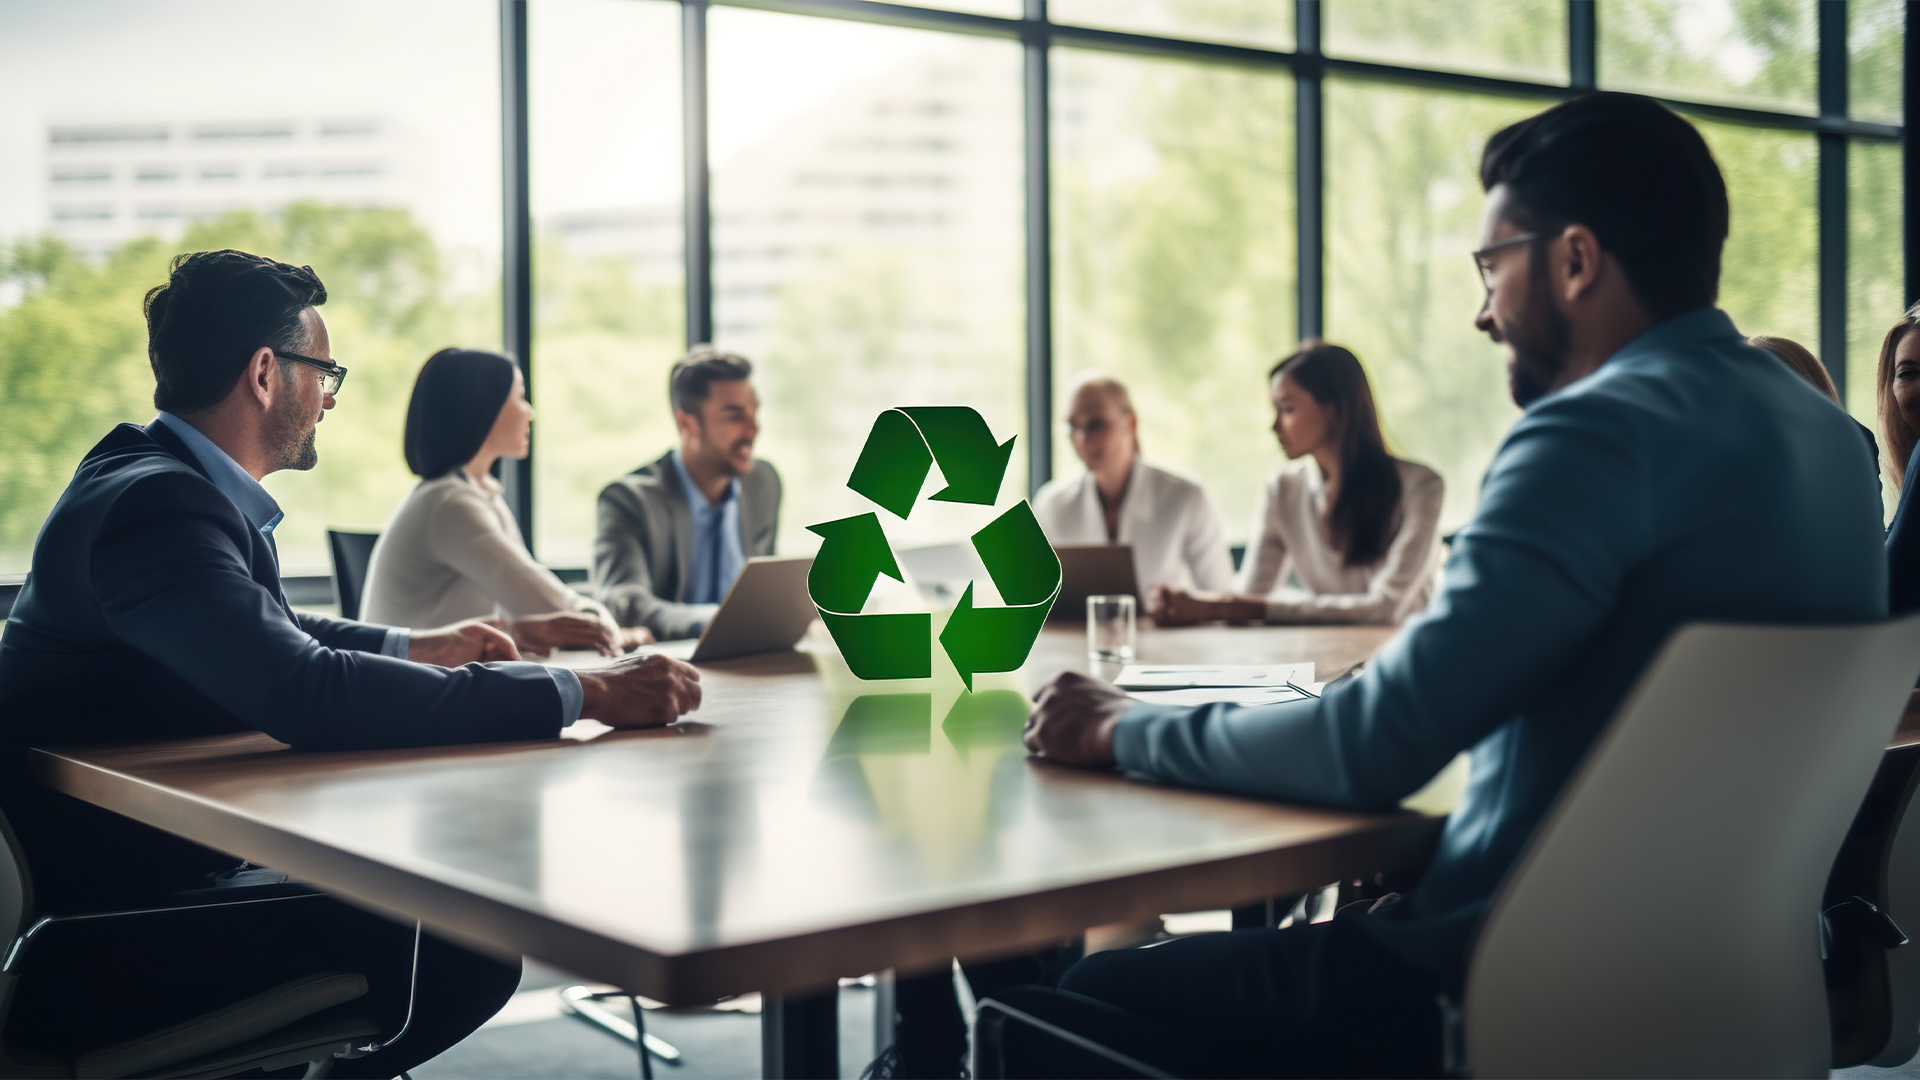 Environmental natural ecology recycle icon on blurred background of diverse group of business professionals